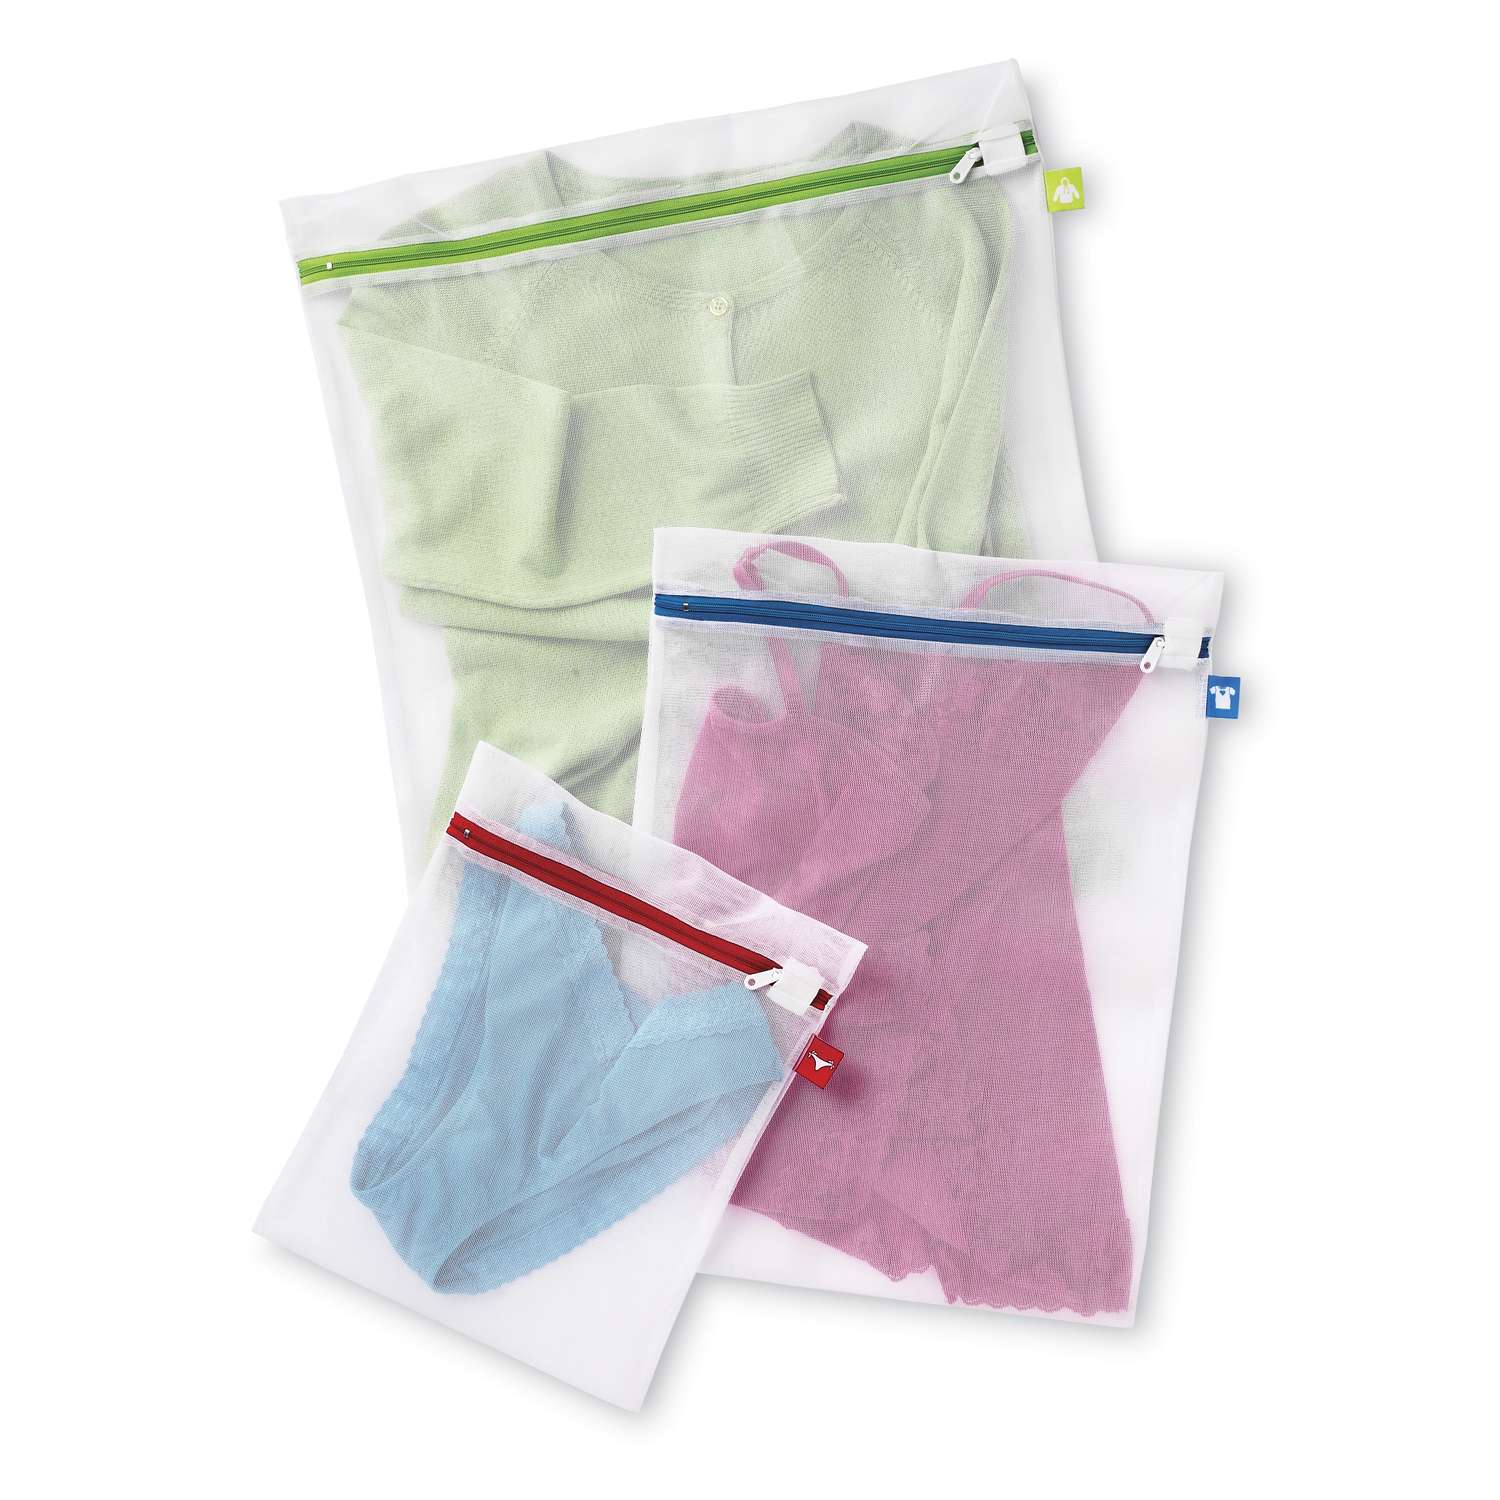 Mesh Laundry Bag, Assorted Colors